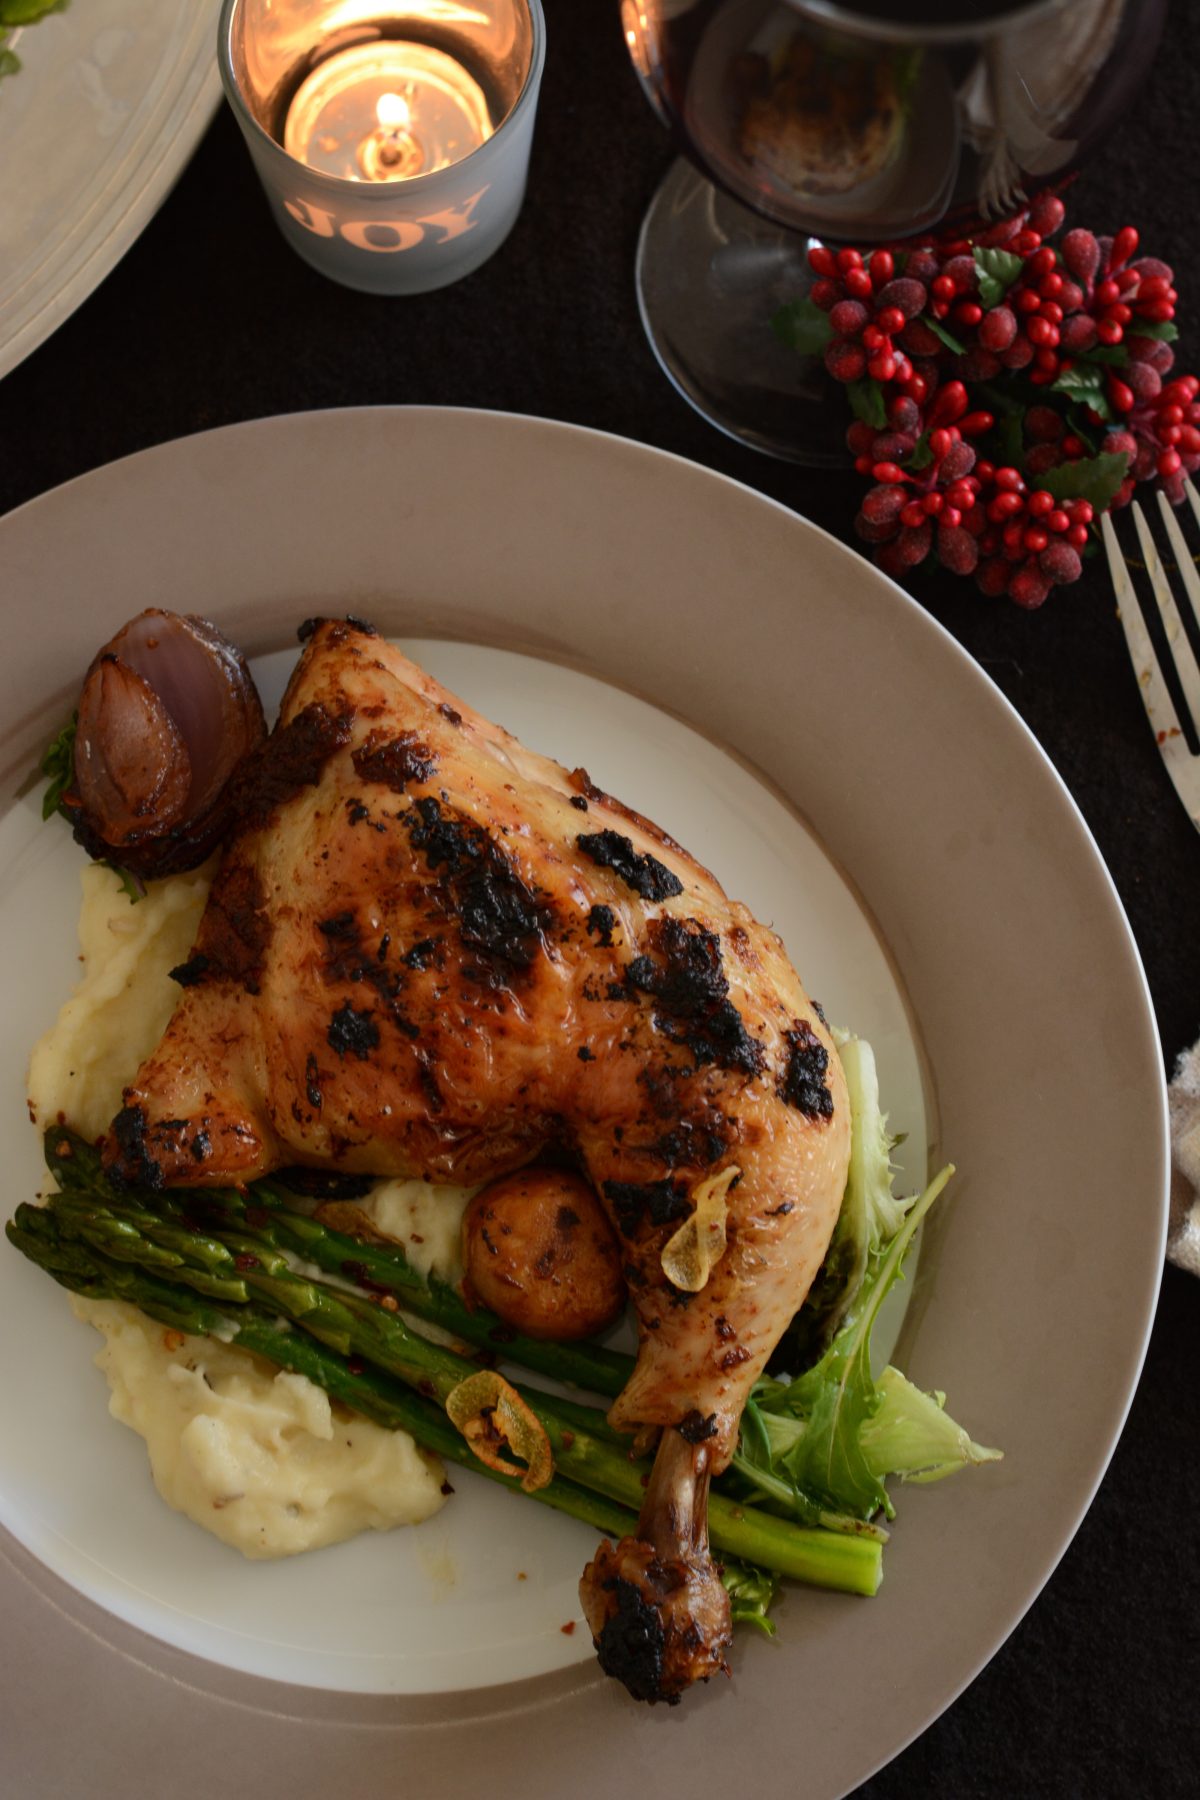 Roast Chicken with Vegemite Masala (with Chilli Garlic Asparagus and Cumin spiced Mashed Potatoes) - an Indo Australian fusion recipe - thespiceadventuress.com